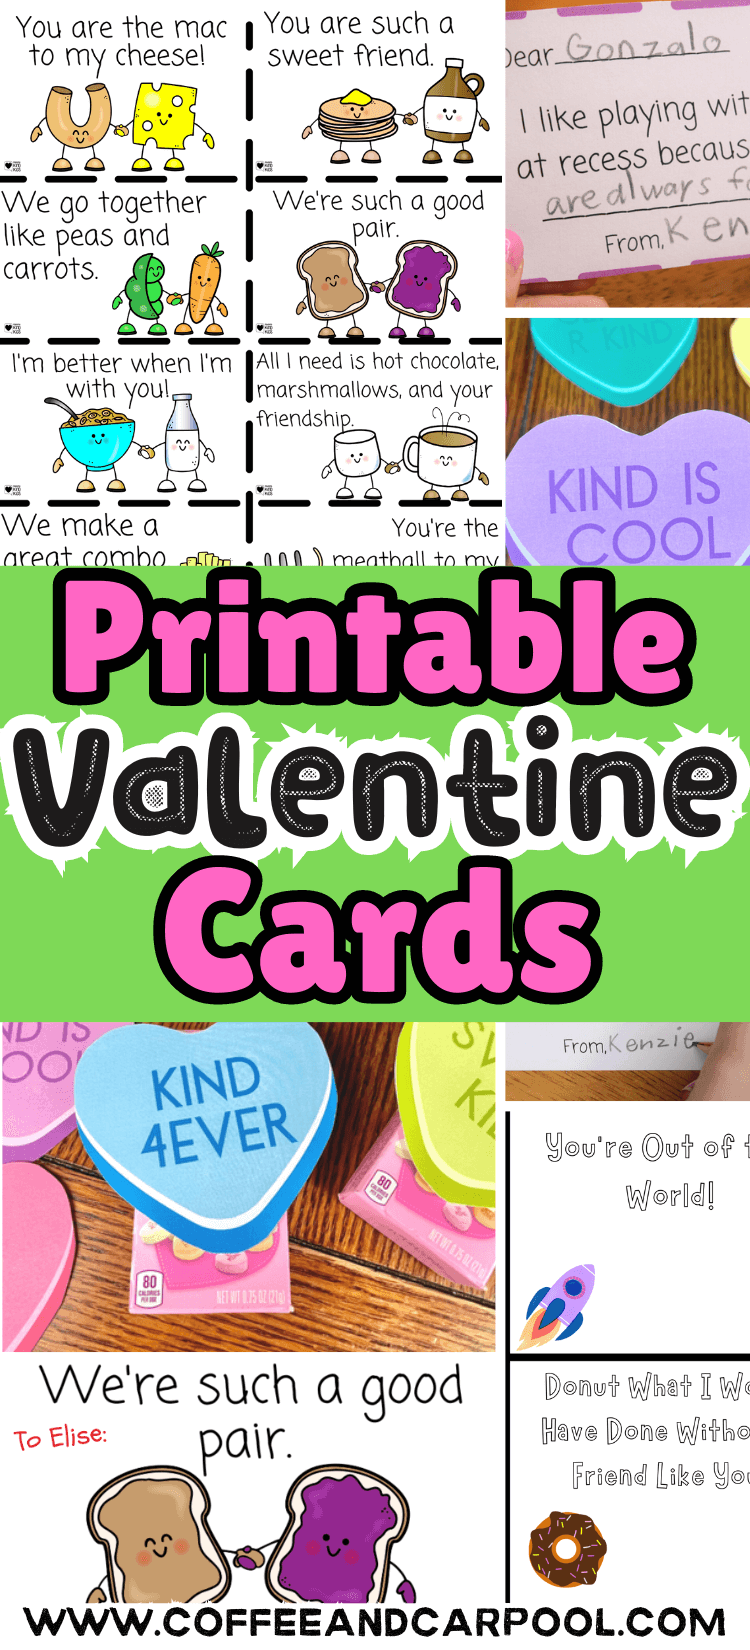 Choose from these printable Valentines cards for school and friends that kids can print for free and use to spread kindness.